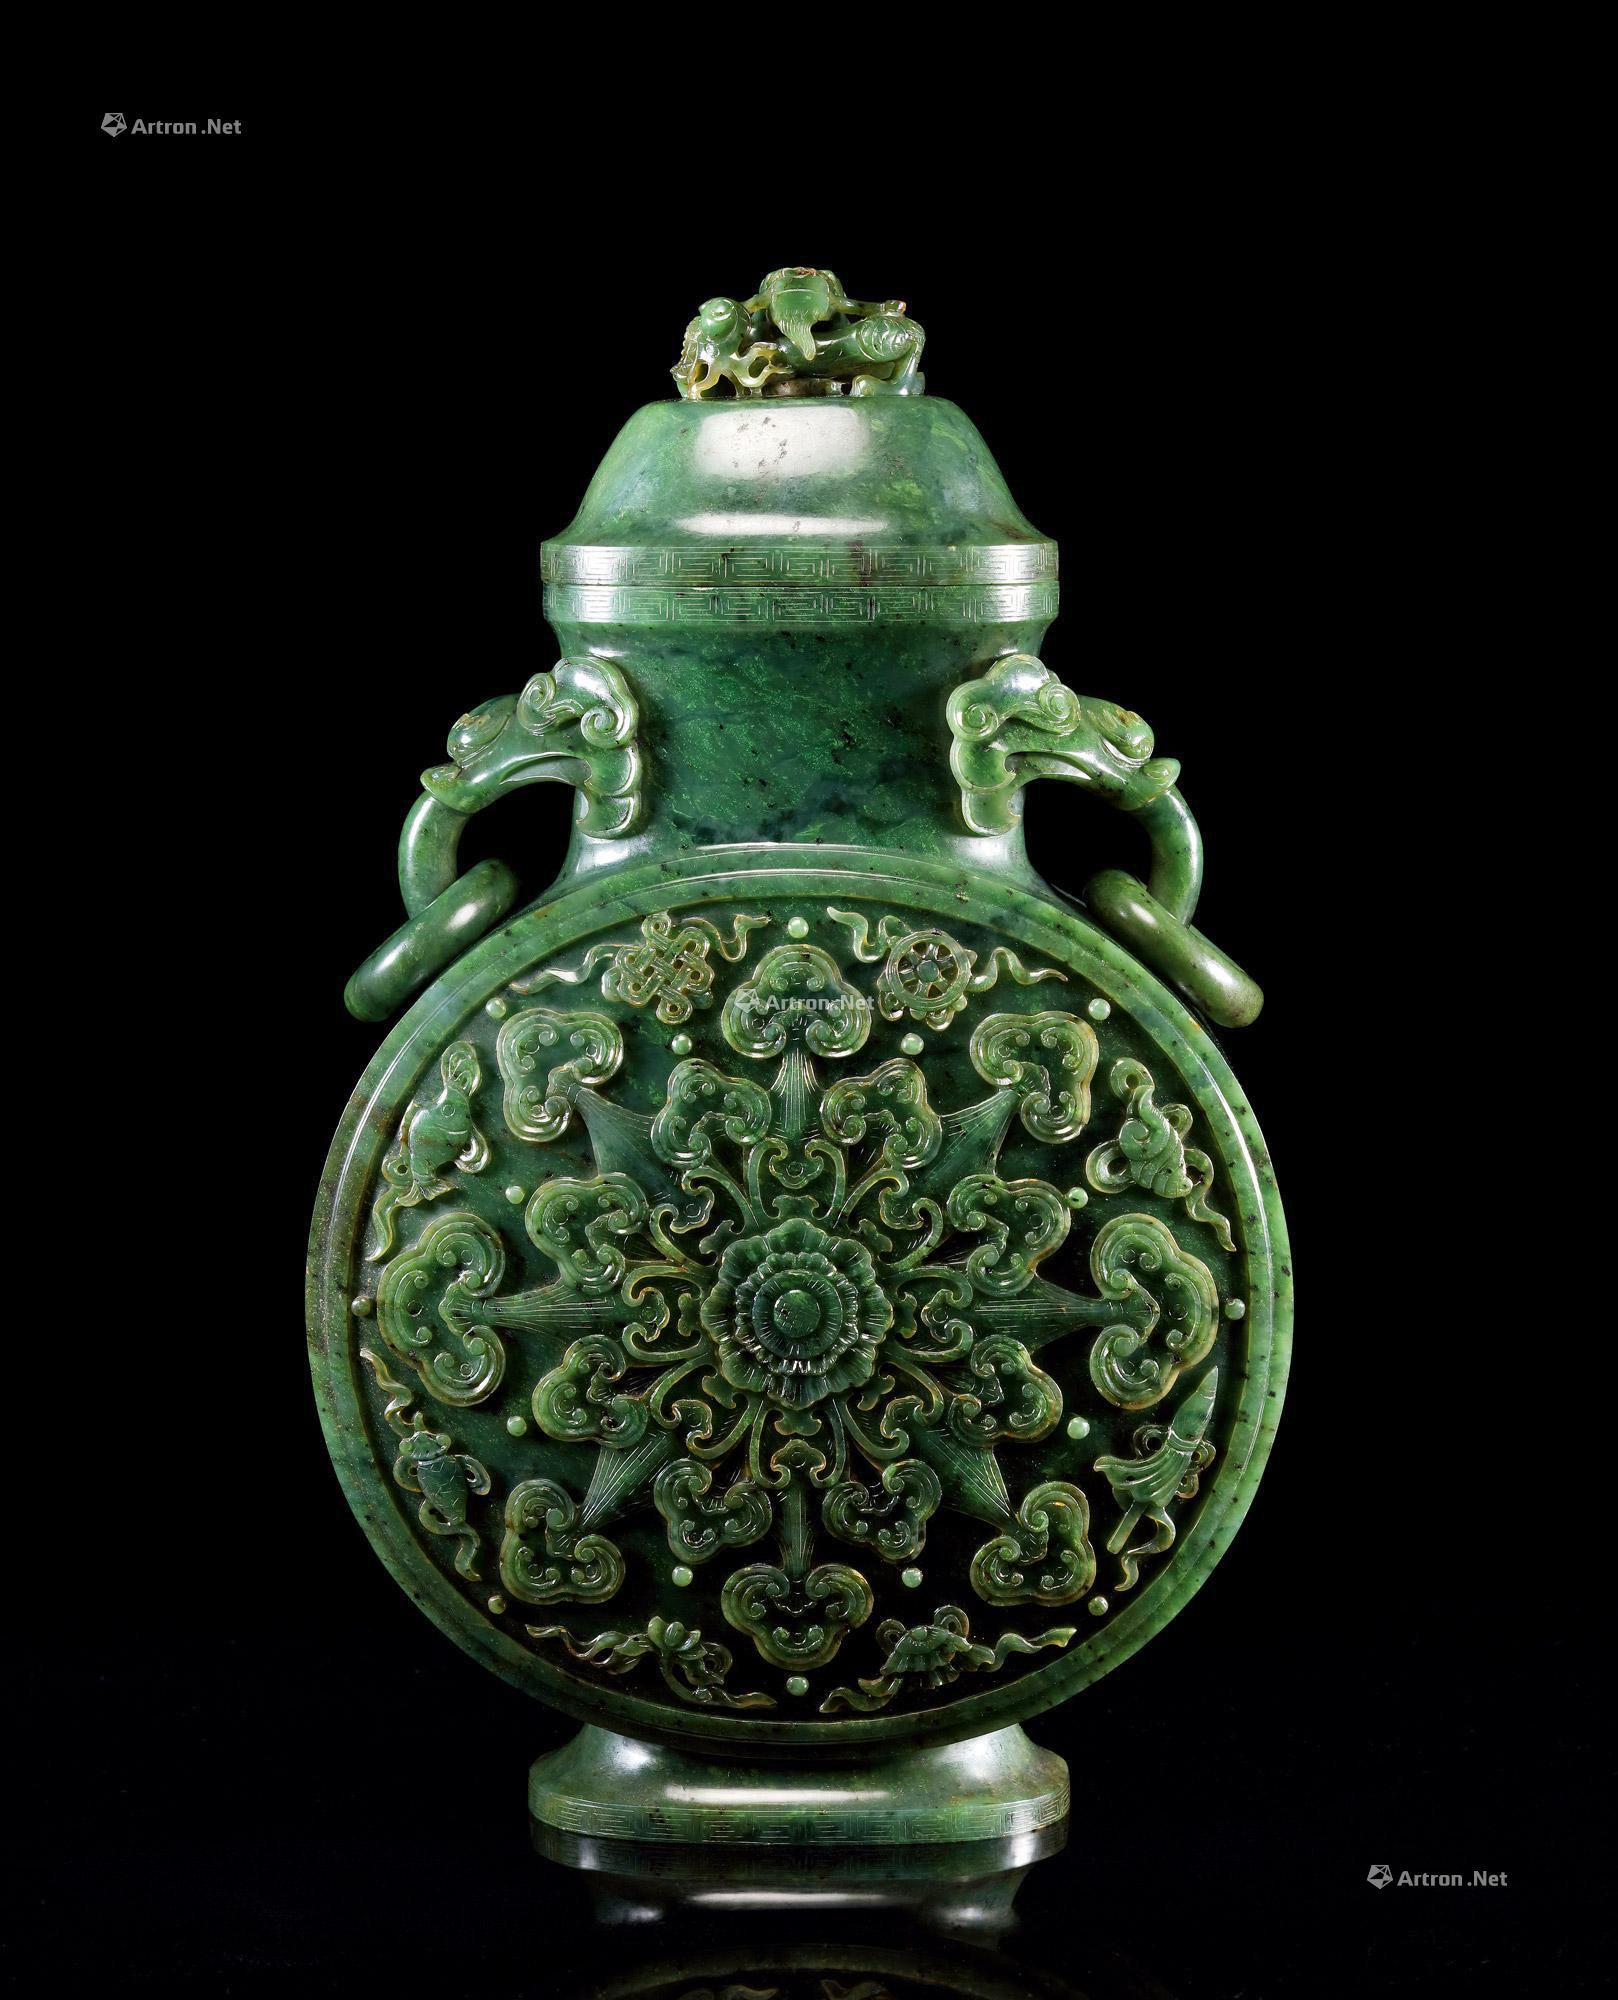 AN IMPERIAL GREEN JADE CARVED EIGHT EMBLEMS AND LOTUS PATTERNED MOON VASE WITH DRAGON-KNOB